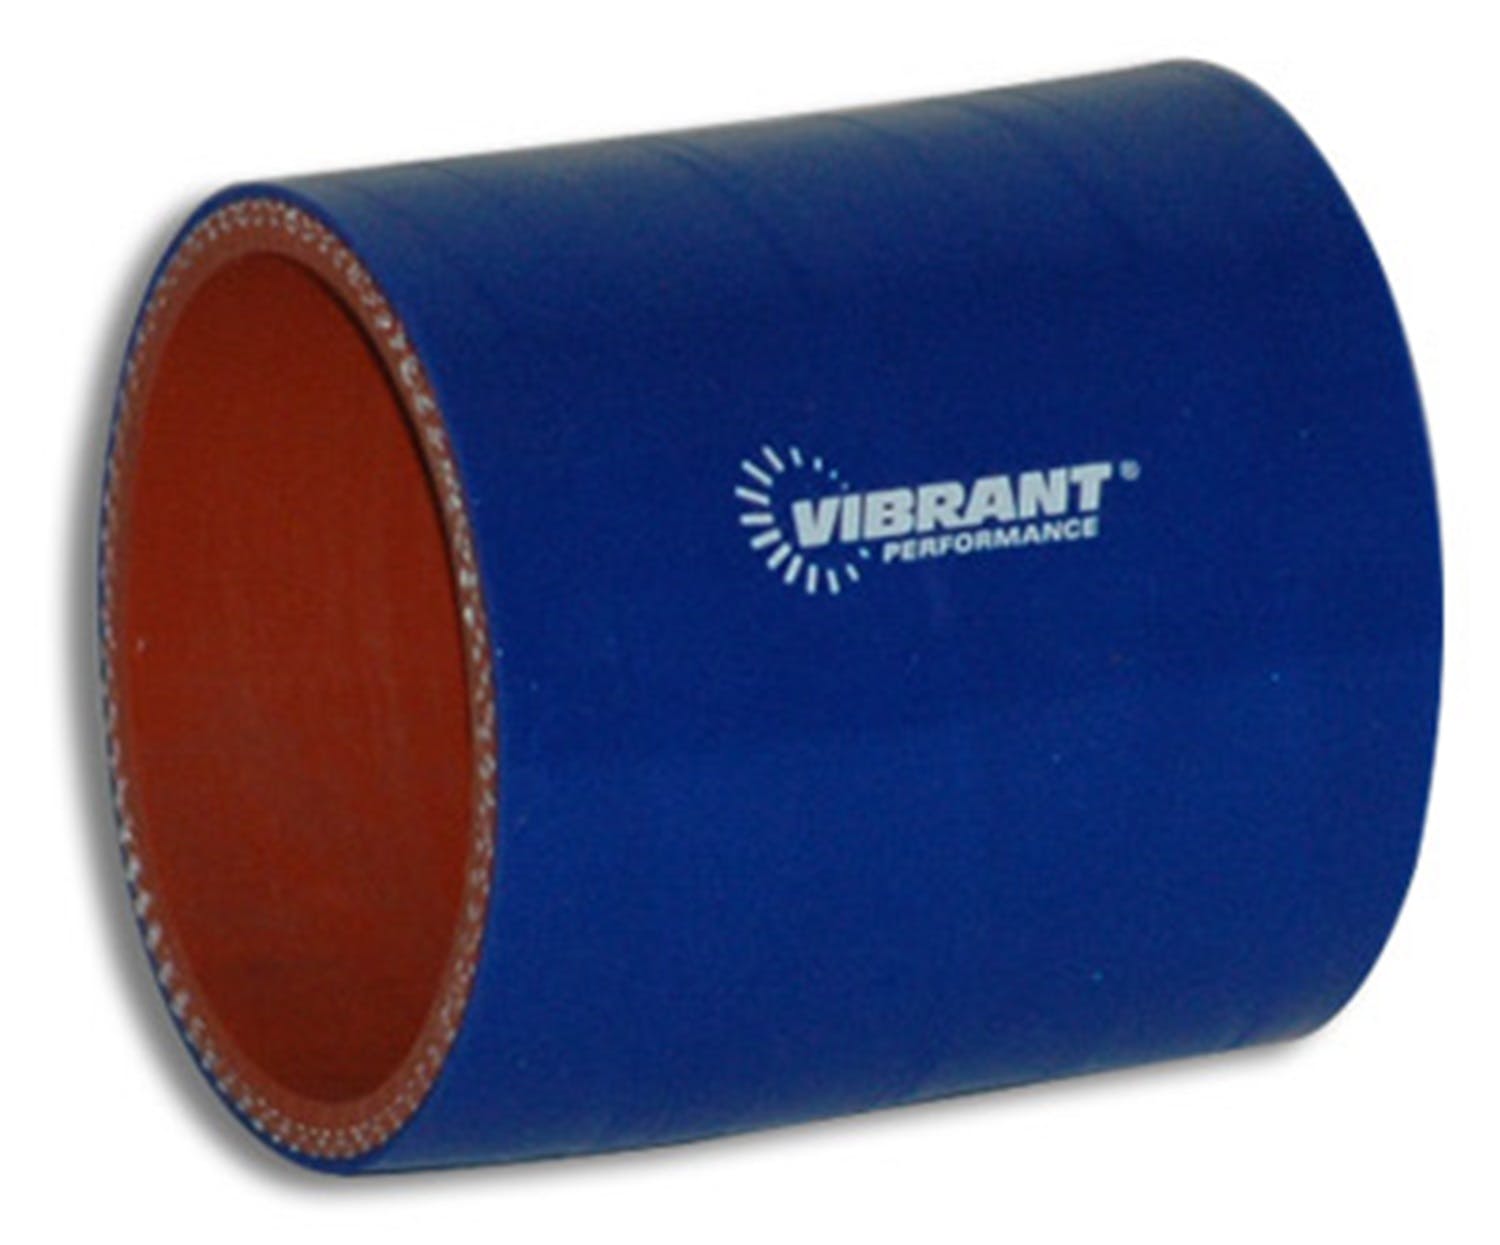 Vibrant Performance 2702B 4 Ply Silicone Sleeve, 1.5 inch I.D. x 3 inch Long - Blue